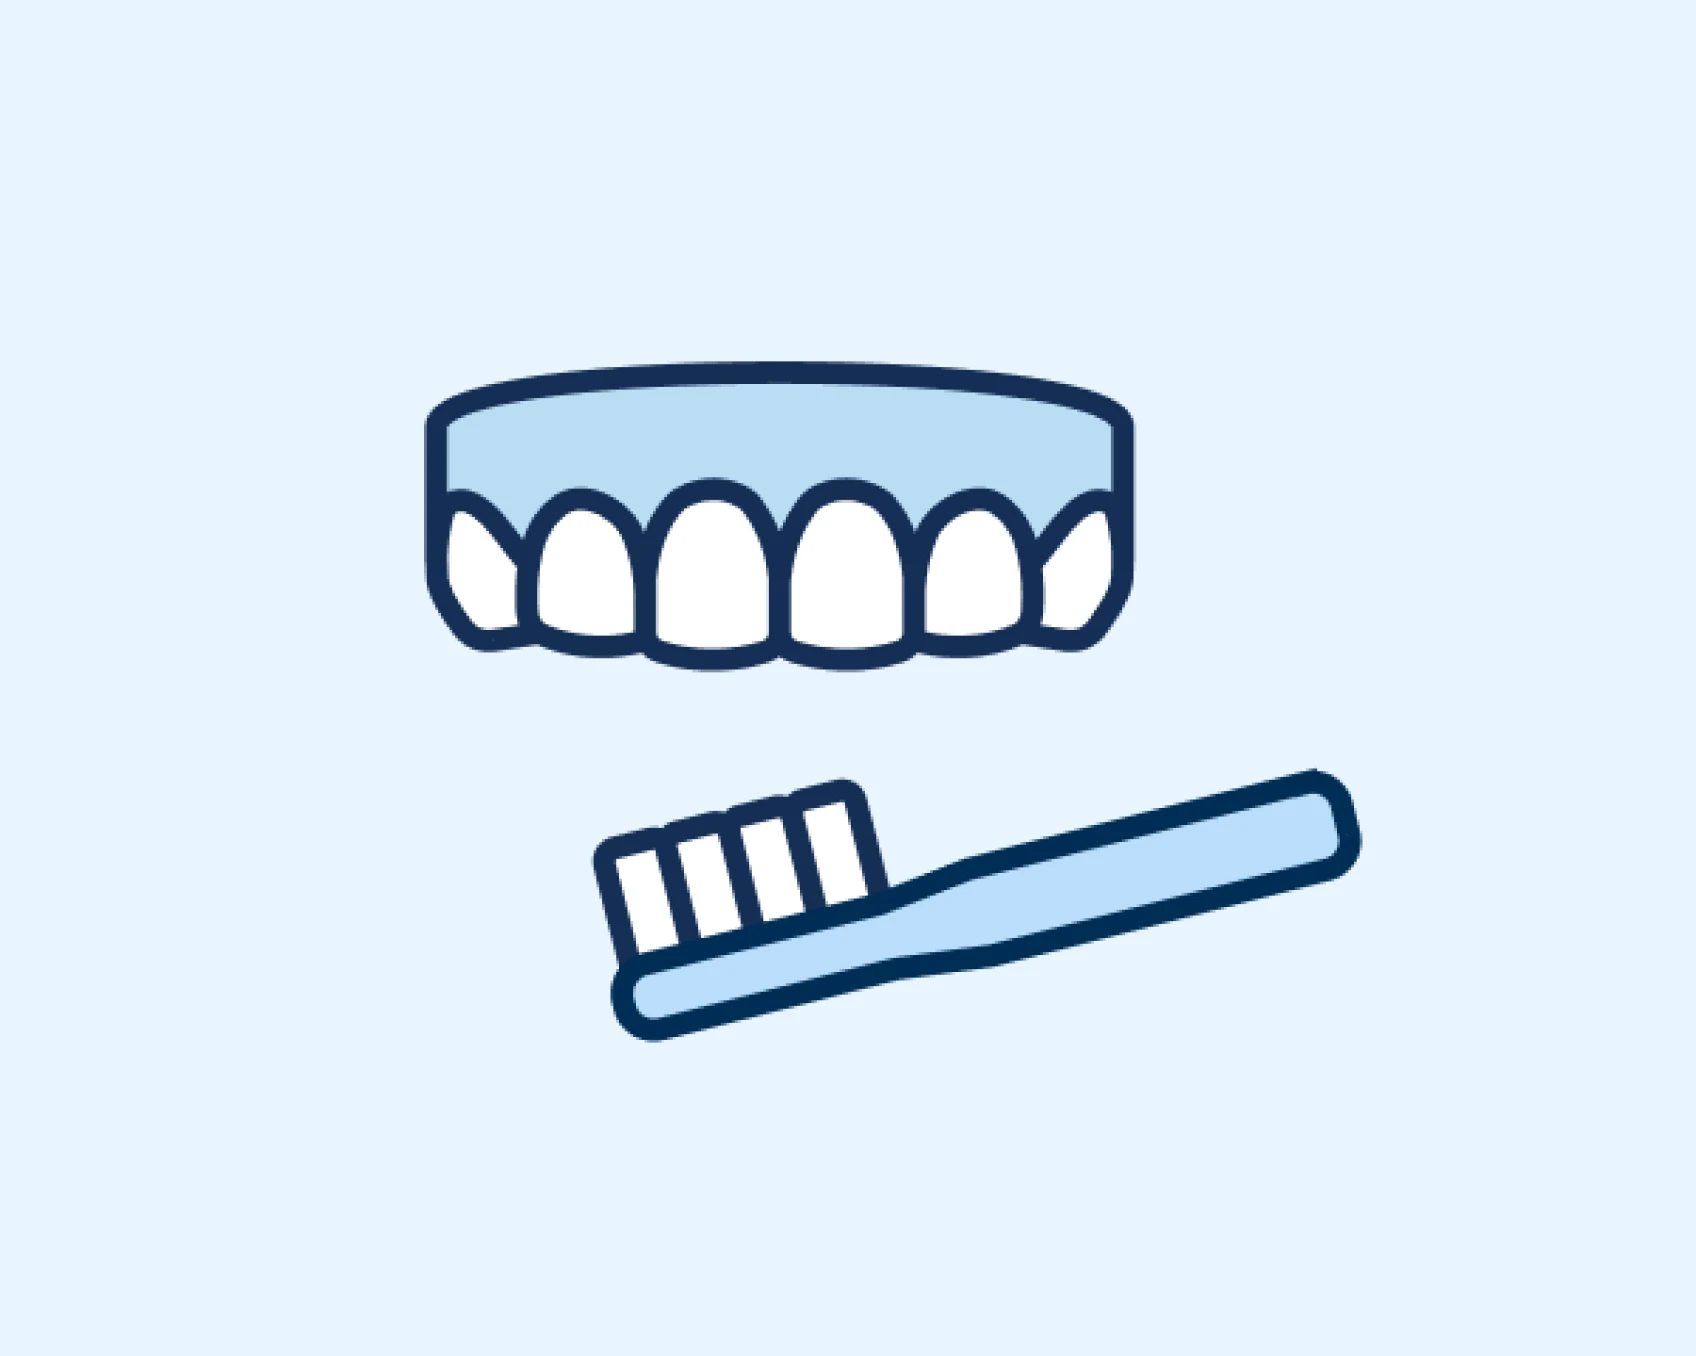 Periodontal maintenance cleaning sustains gum health, preventing gum disease recurrence.